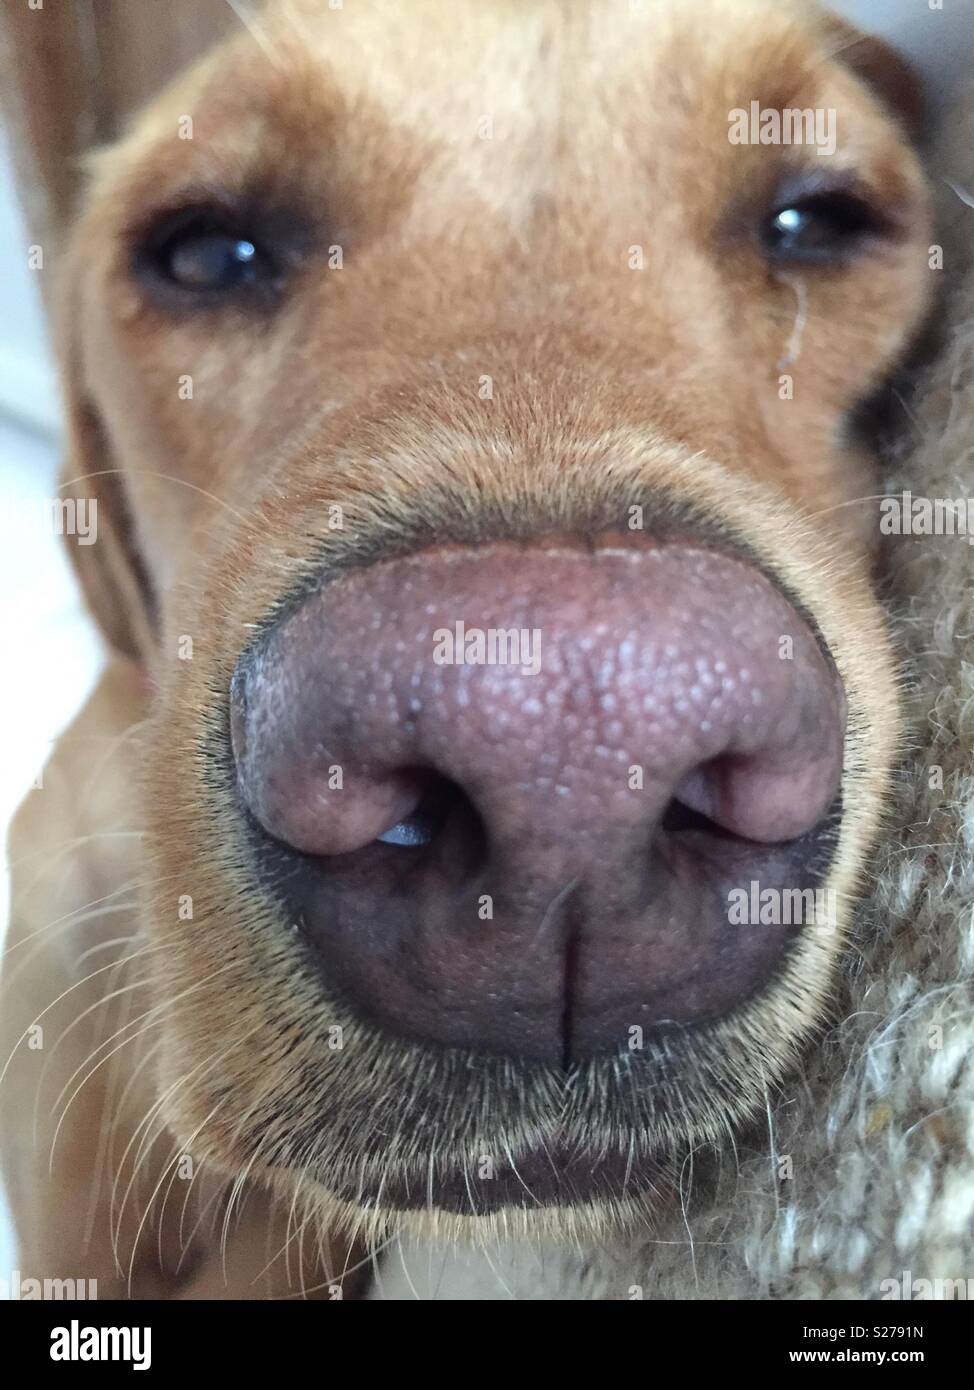 Close up of a dog with a very large nose Stock Photo